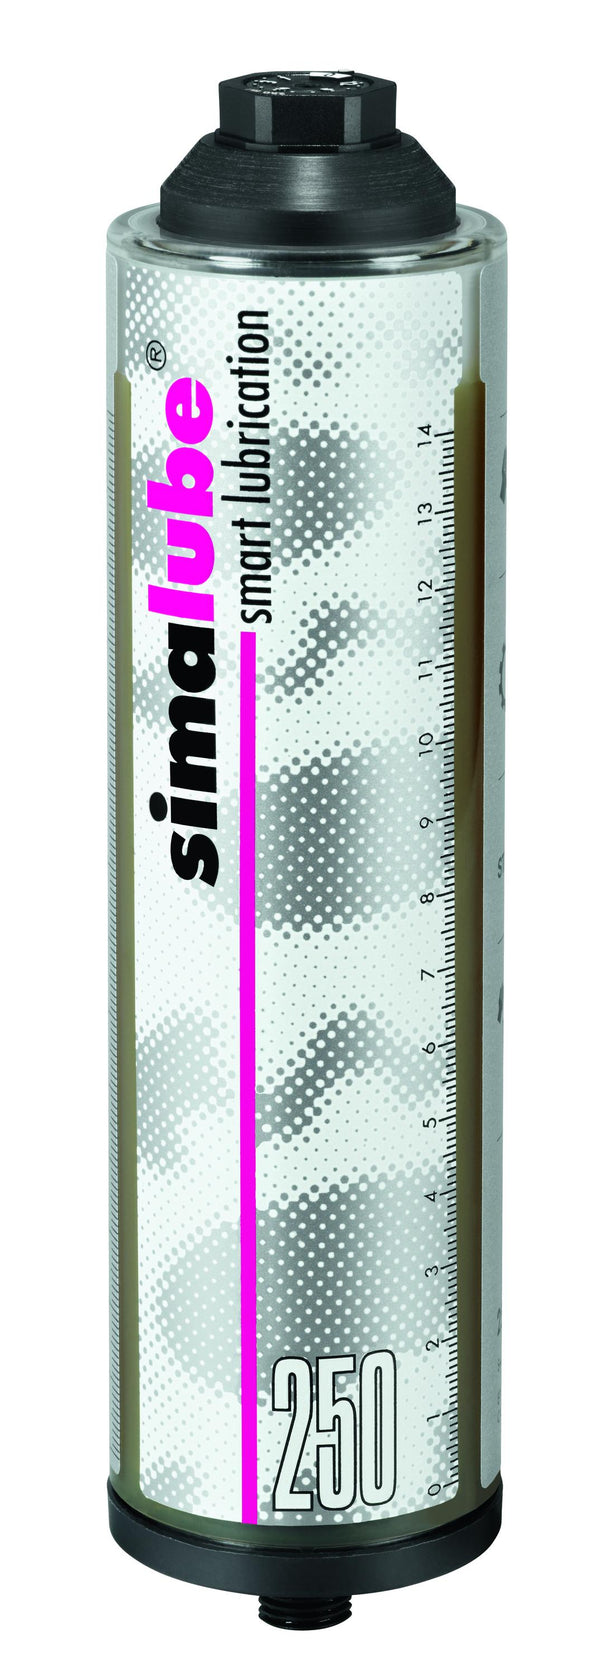 Simalube lubricator filled with food grease 250ml